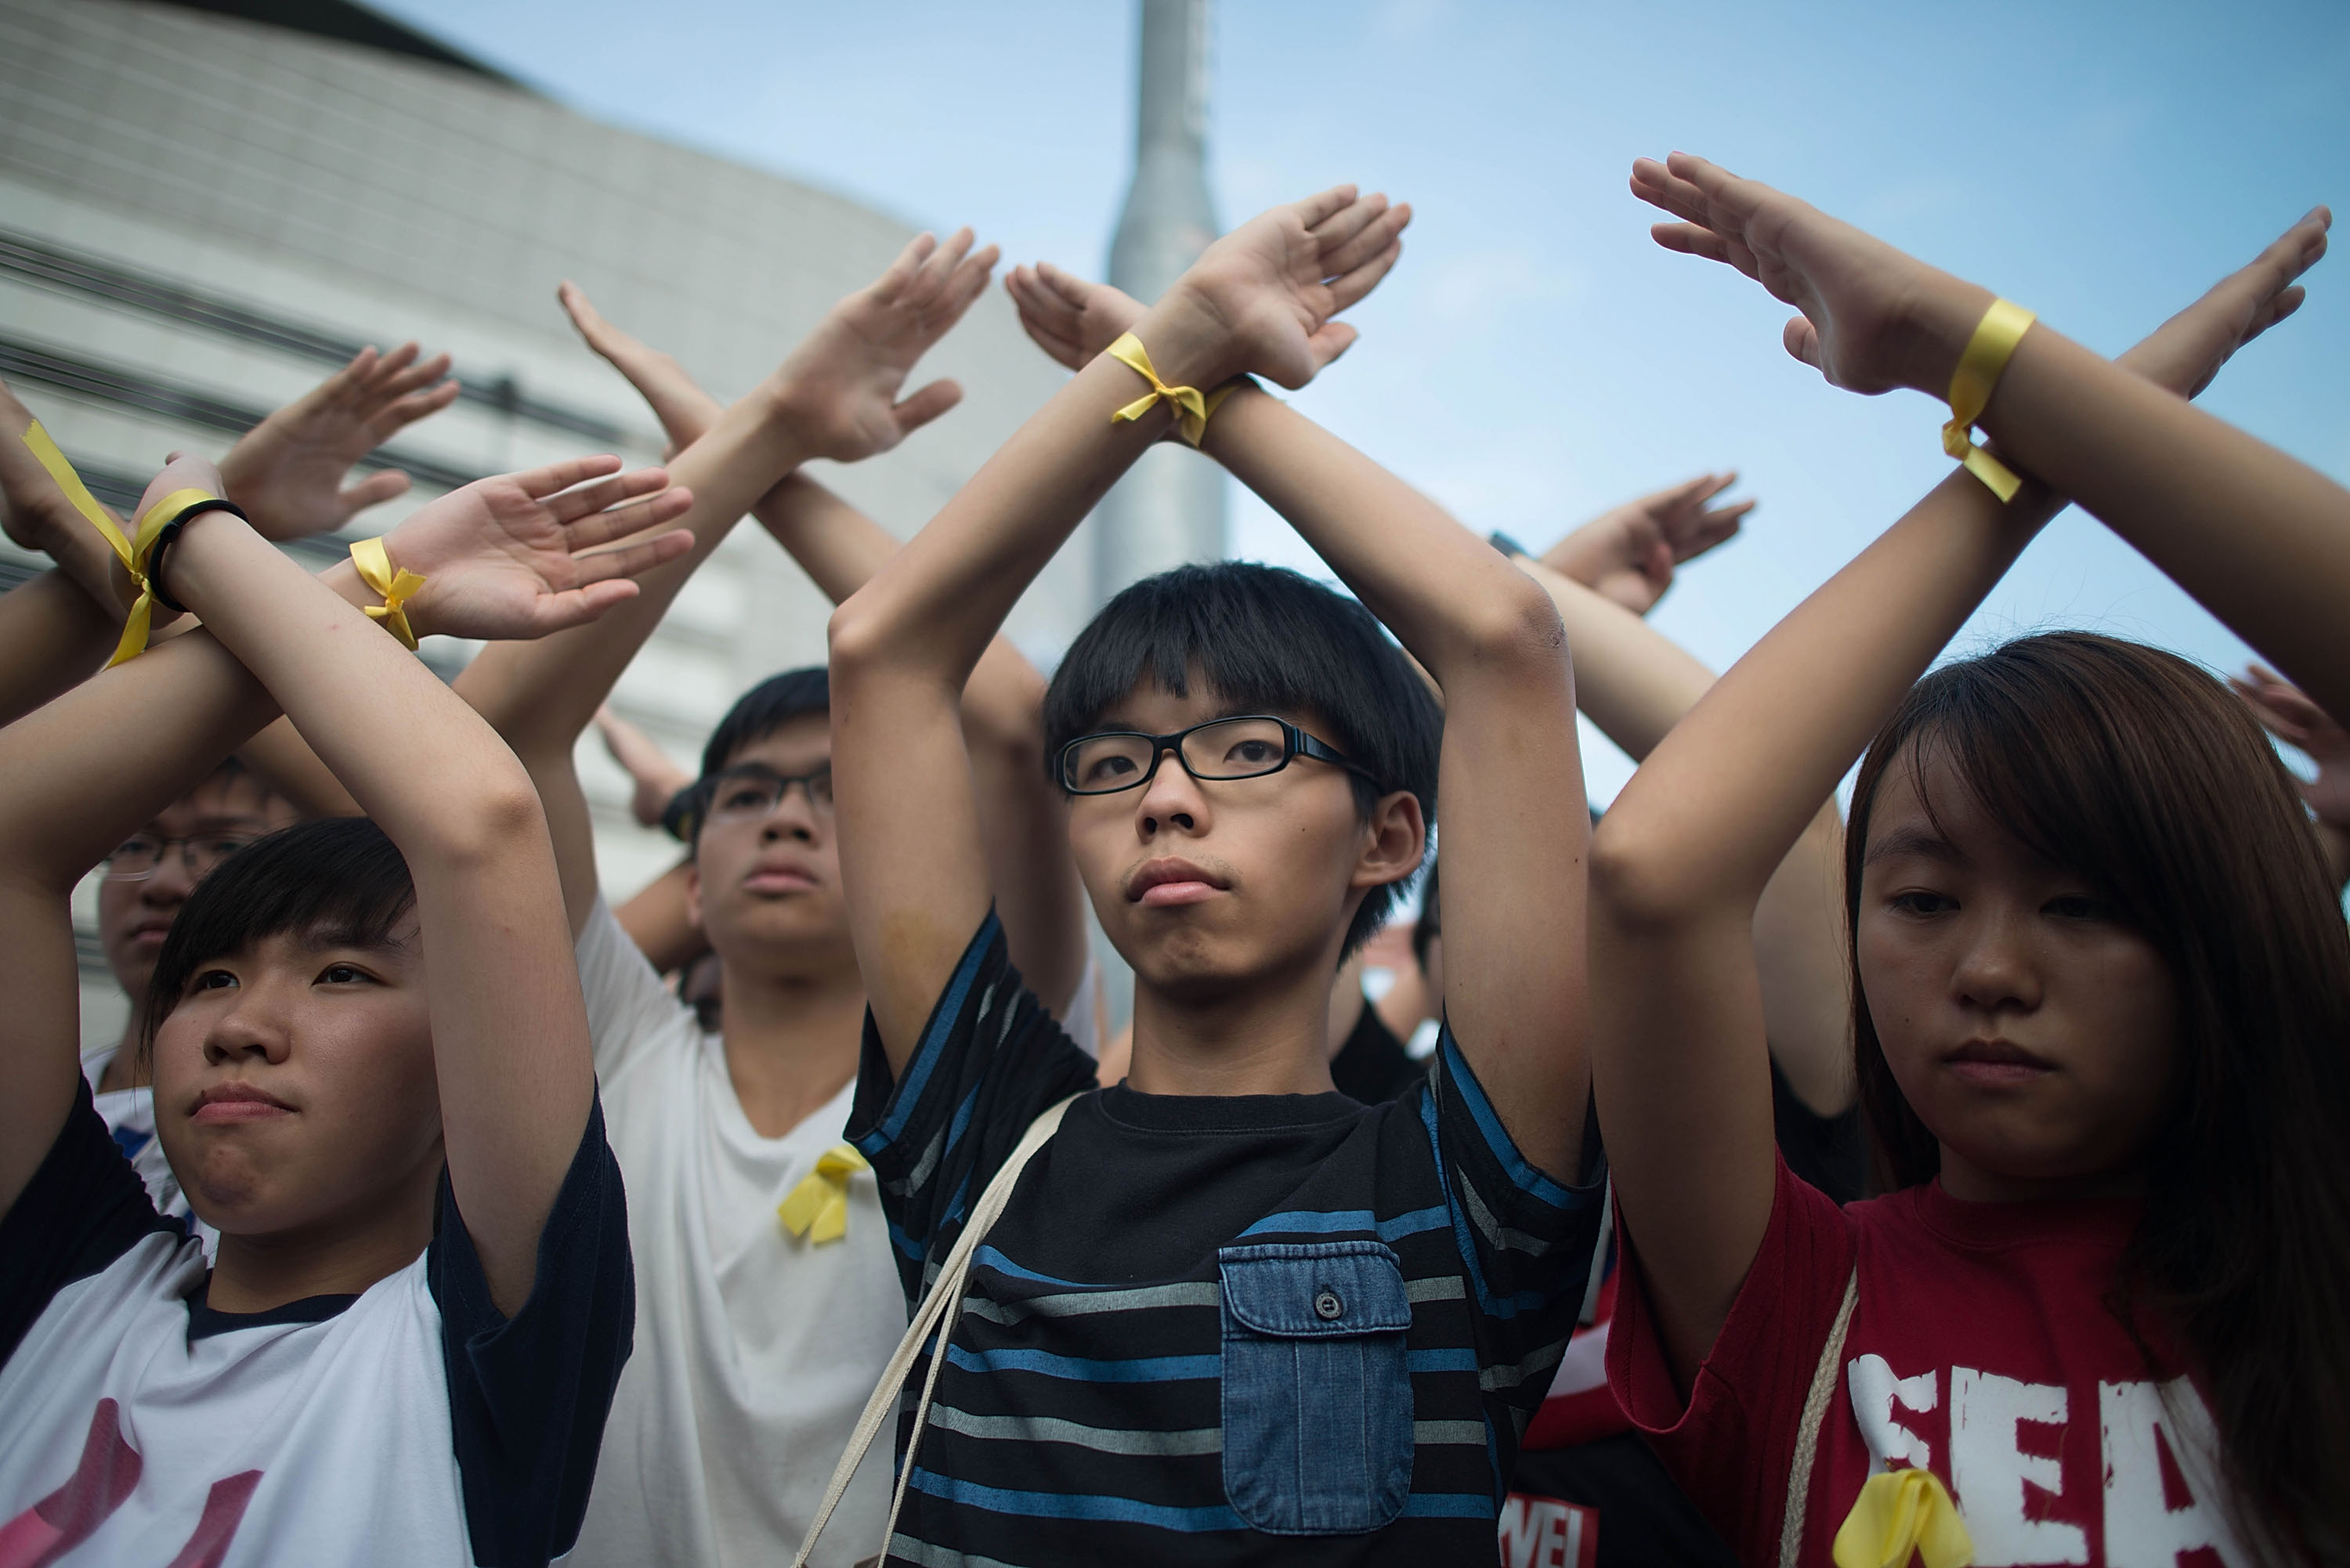 Student pro-democracy group Scholarism convenor Joshua Wong (C) makes a gesture at the Flag Raising Ceremony at Golden Bauhinia Square on October 1, 2014 in Hong Kong. (Anthony Kwan—Getty Images)